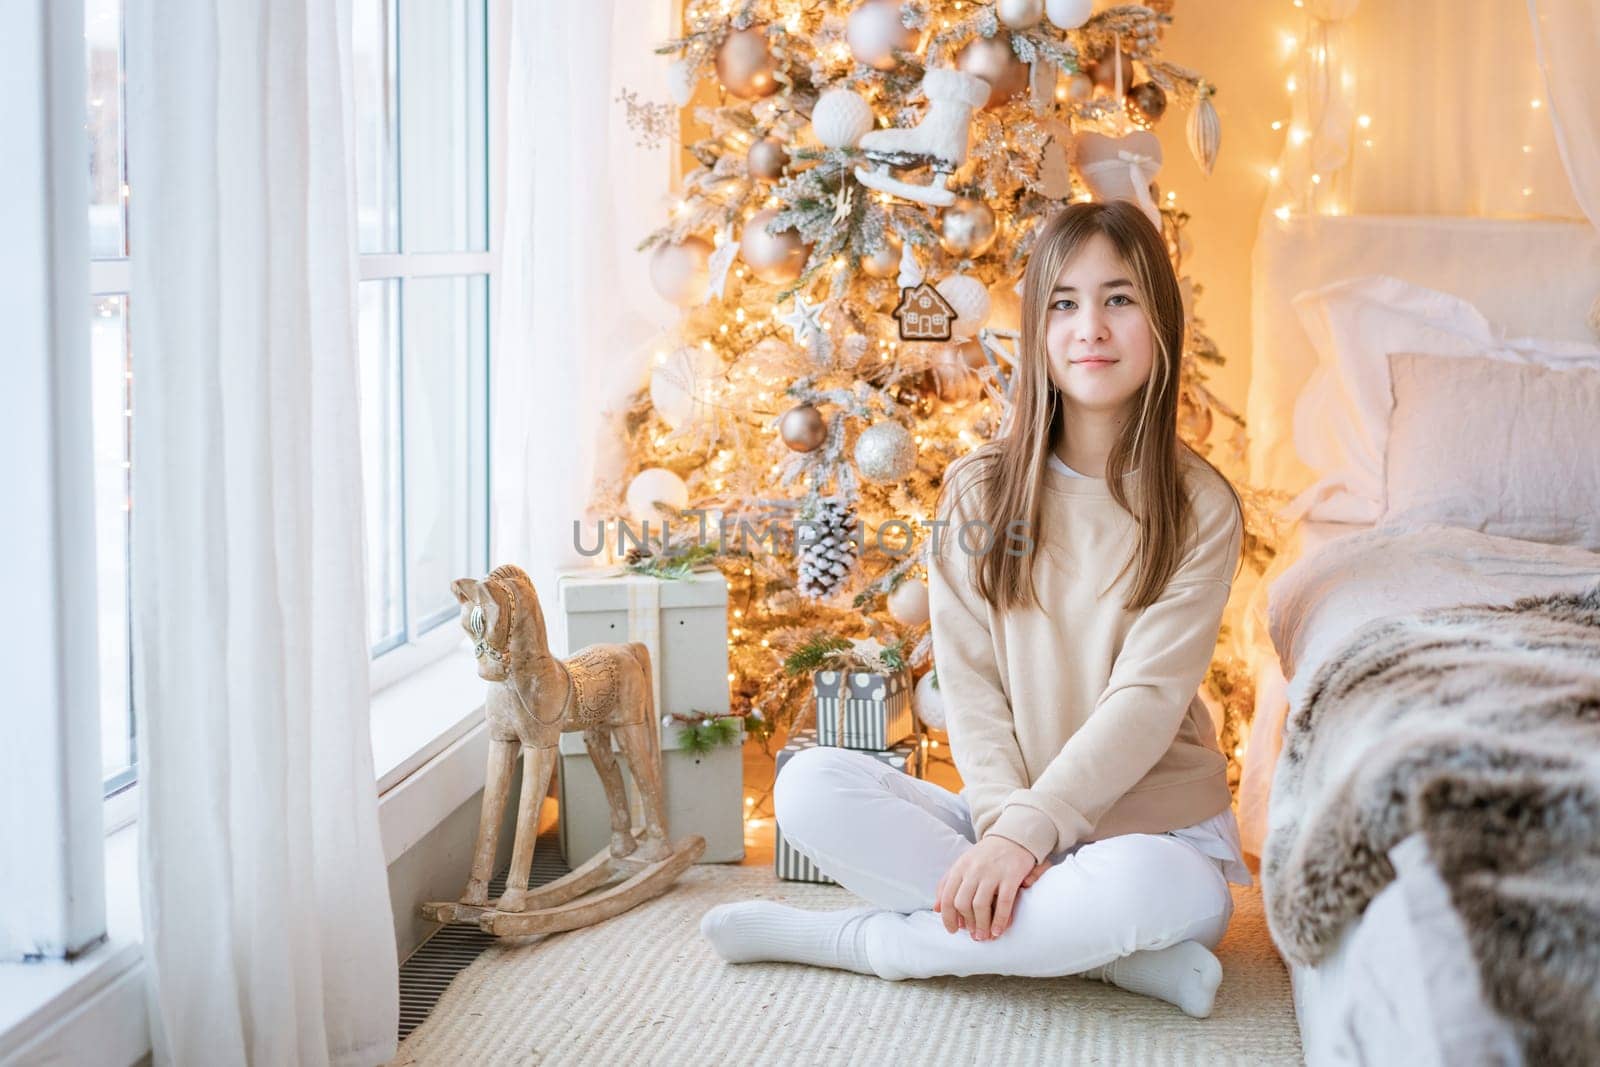 Cute girl sits on floor by window with Christmas tree in background in her bedroom